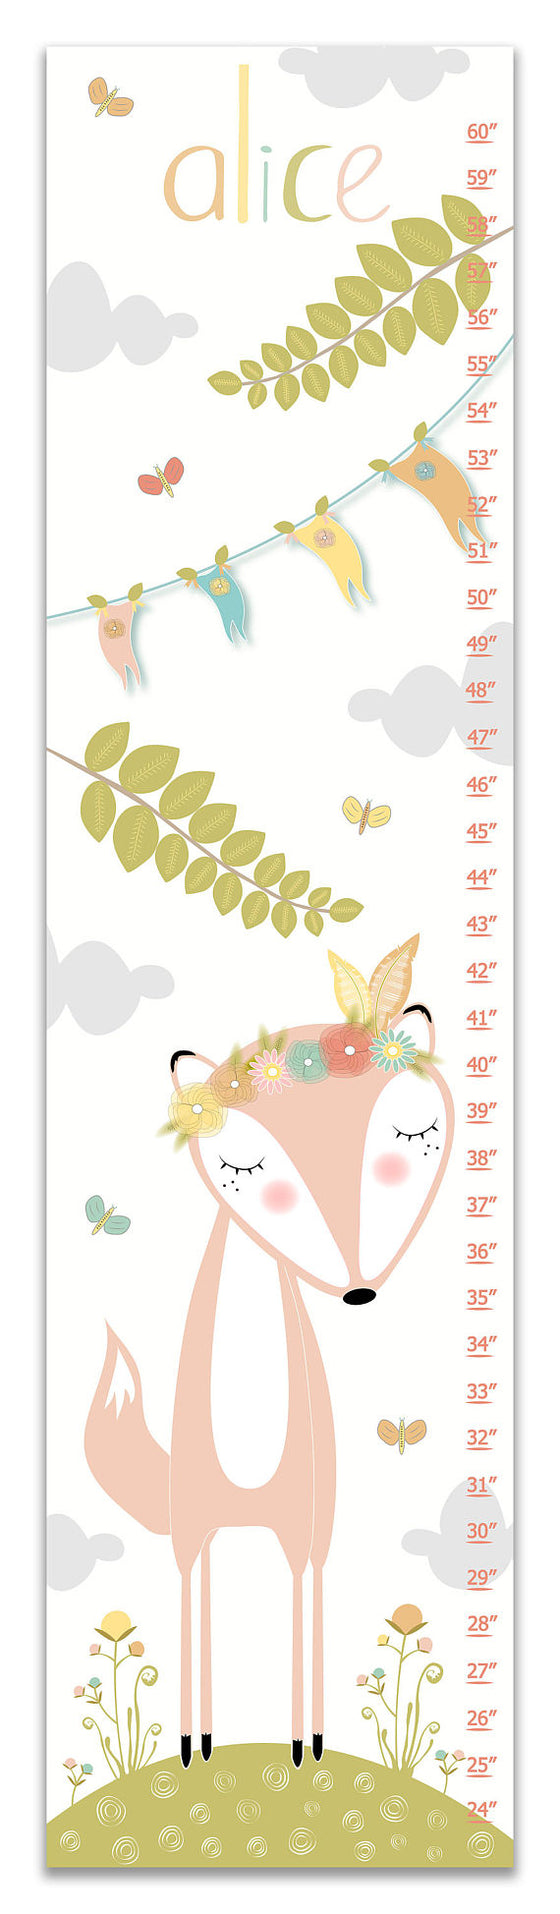 Fox Personalized Growth Chart - Nursery Decor - Baby Girl Gifts